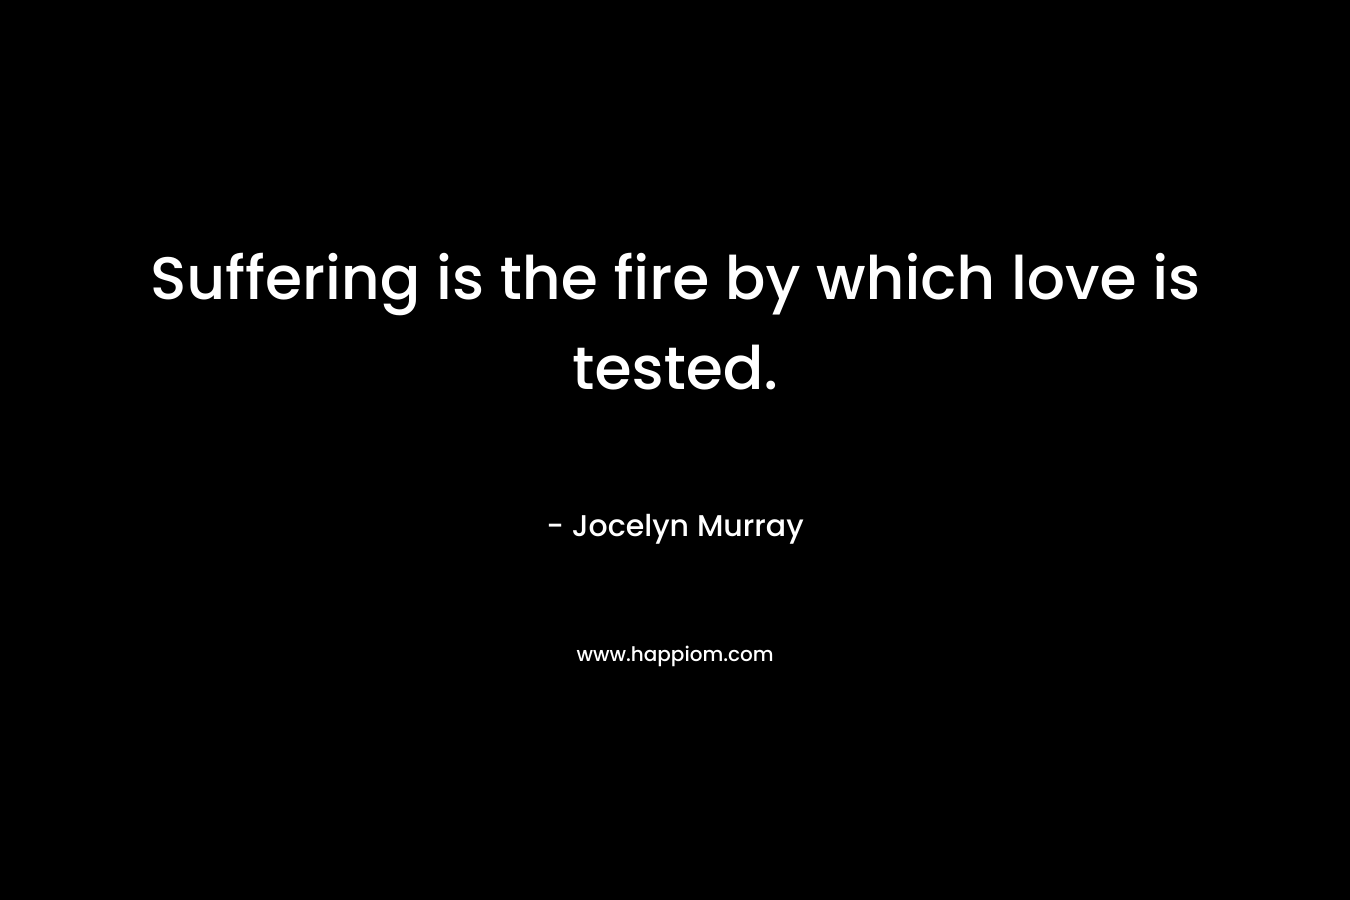 Suffering is the fire by which love is tested.